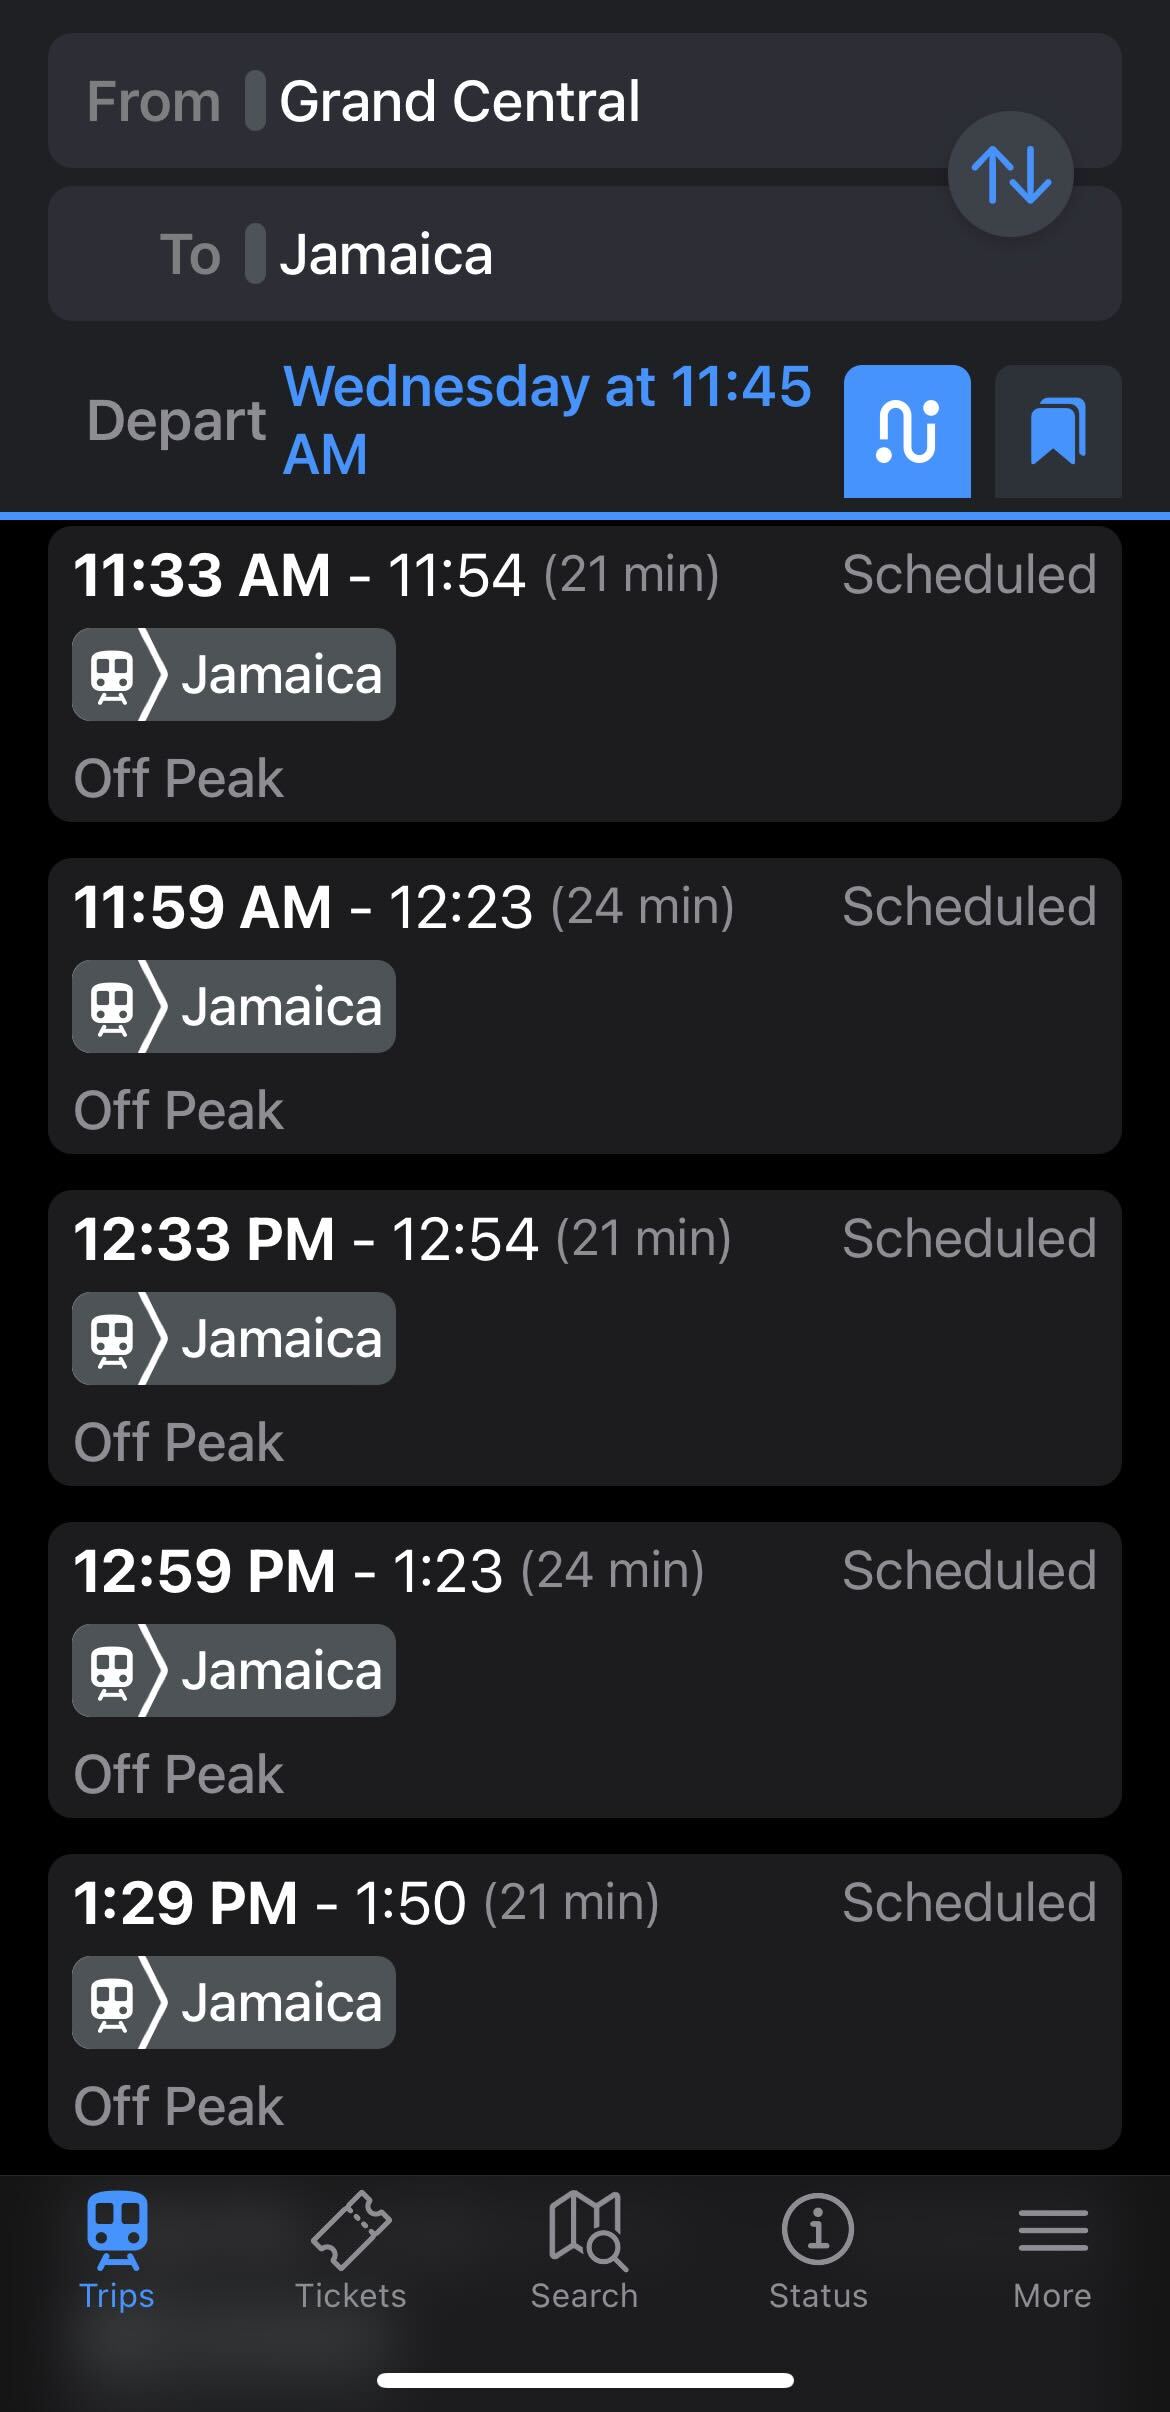 Grand Central to Jamaica in 21 minutes. MTA